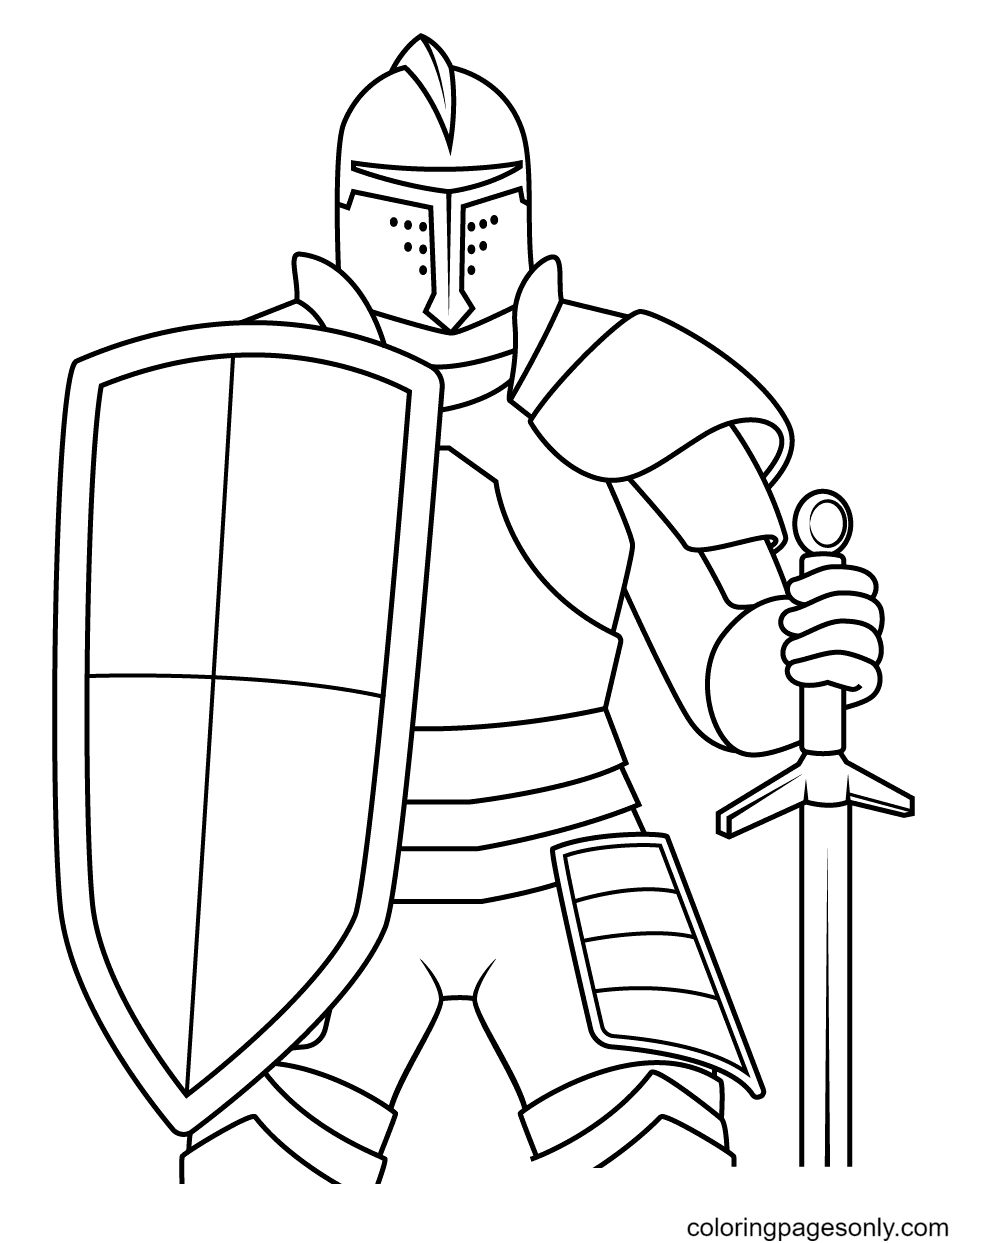 Knight with Sword and Shield Coloring Pages